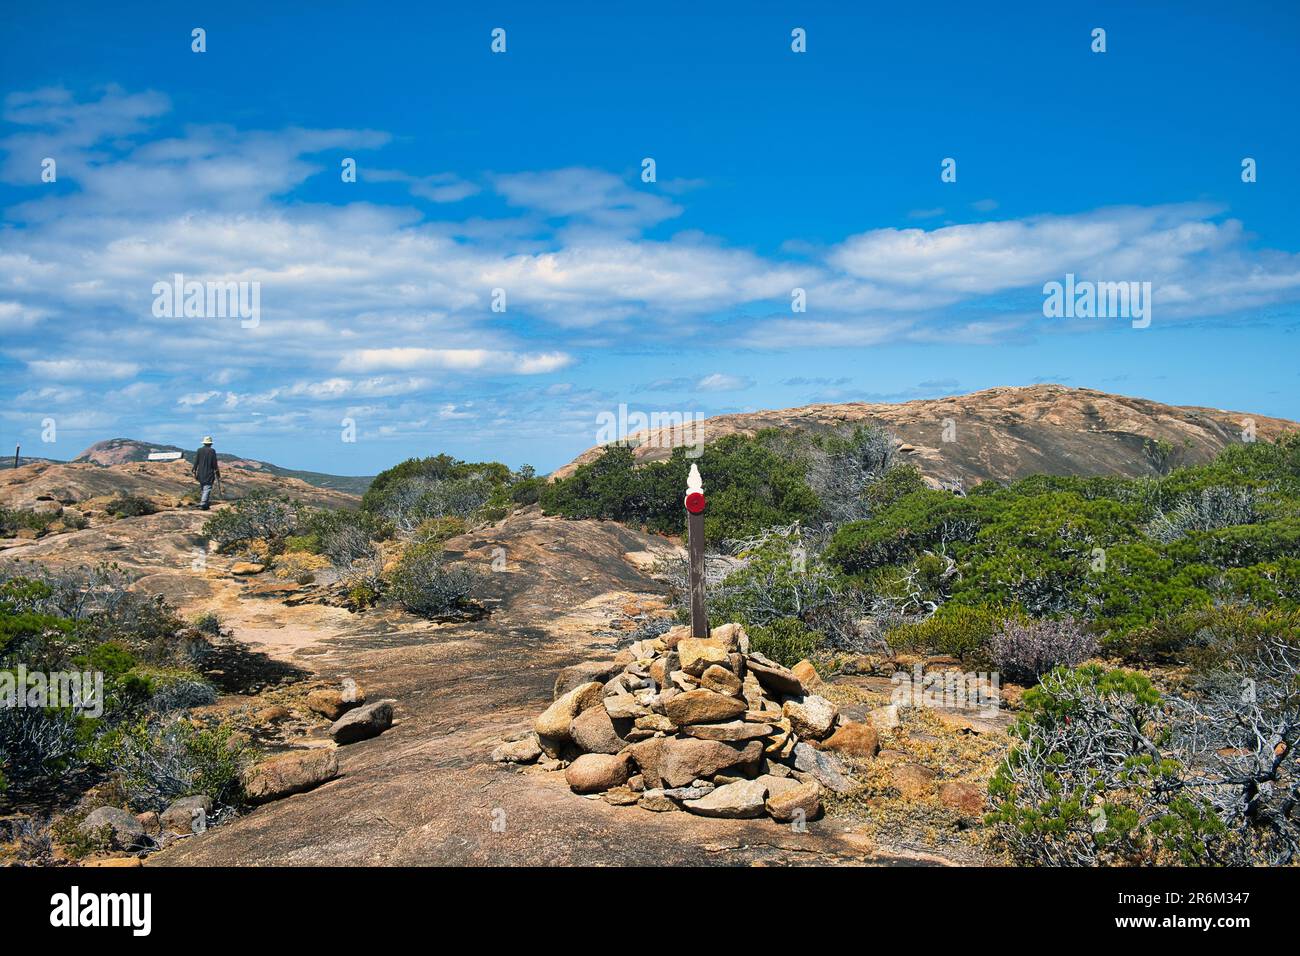 Trail marker, hiker, low coastal vegetation and lichen-covered granite hills along the Coastal Trail in Cape Le Grand National Park, Western Australia Stock Photo